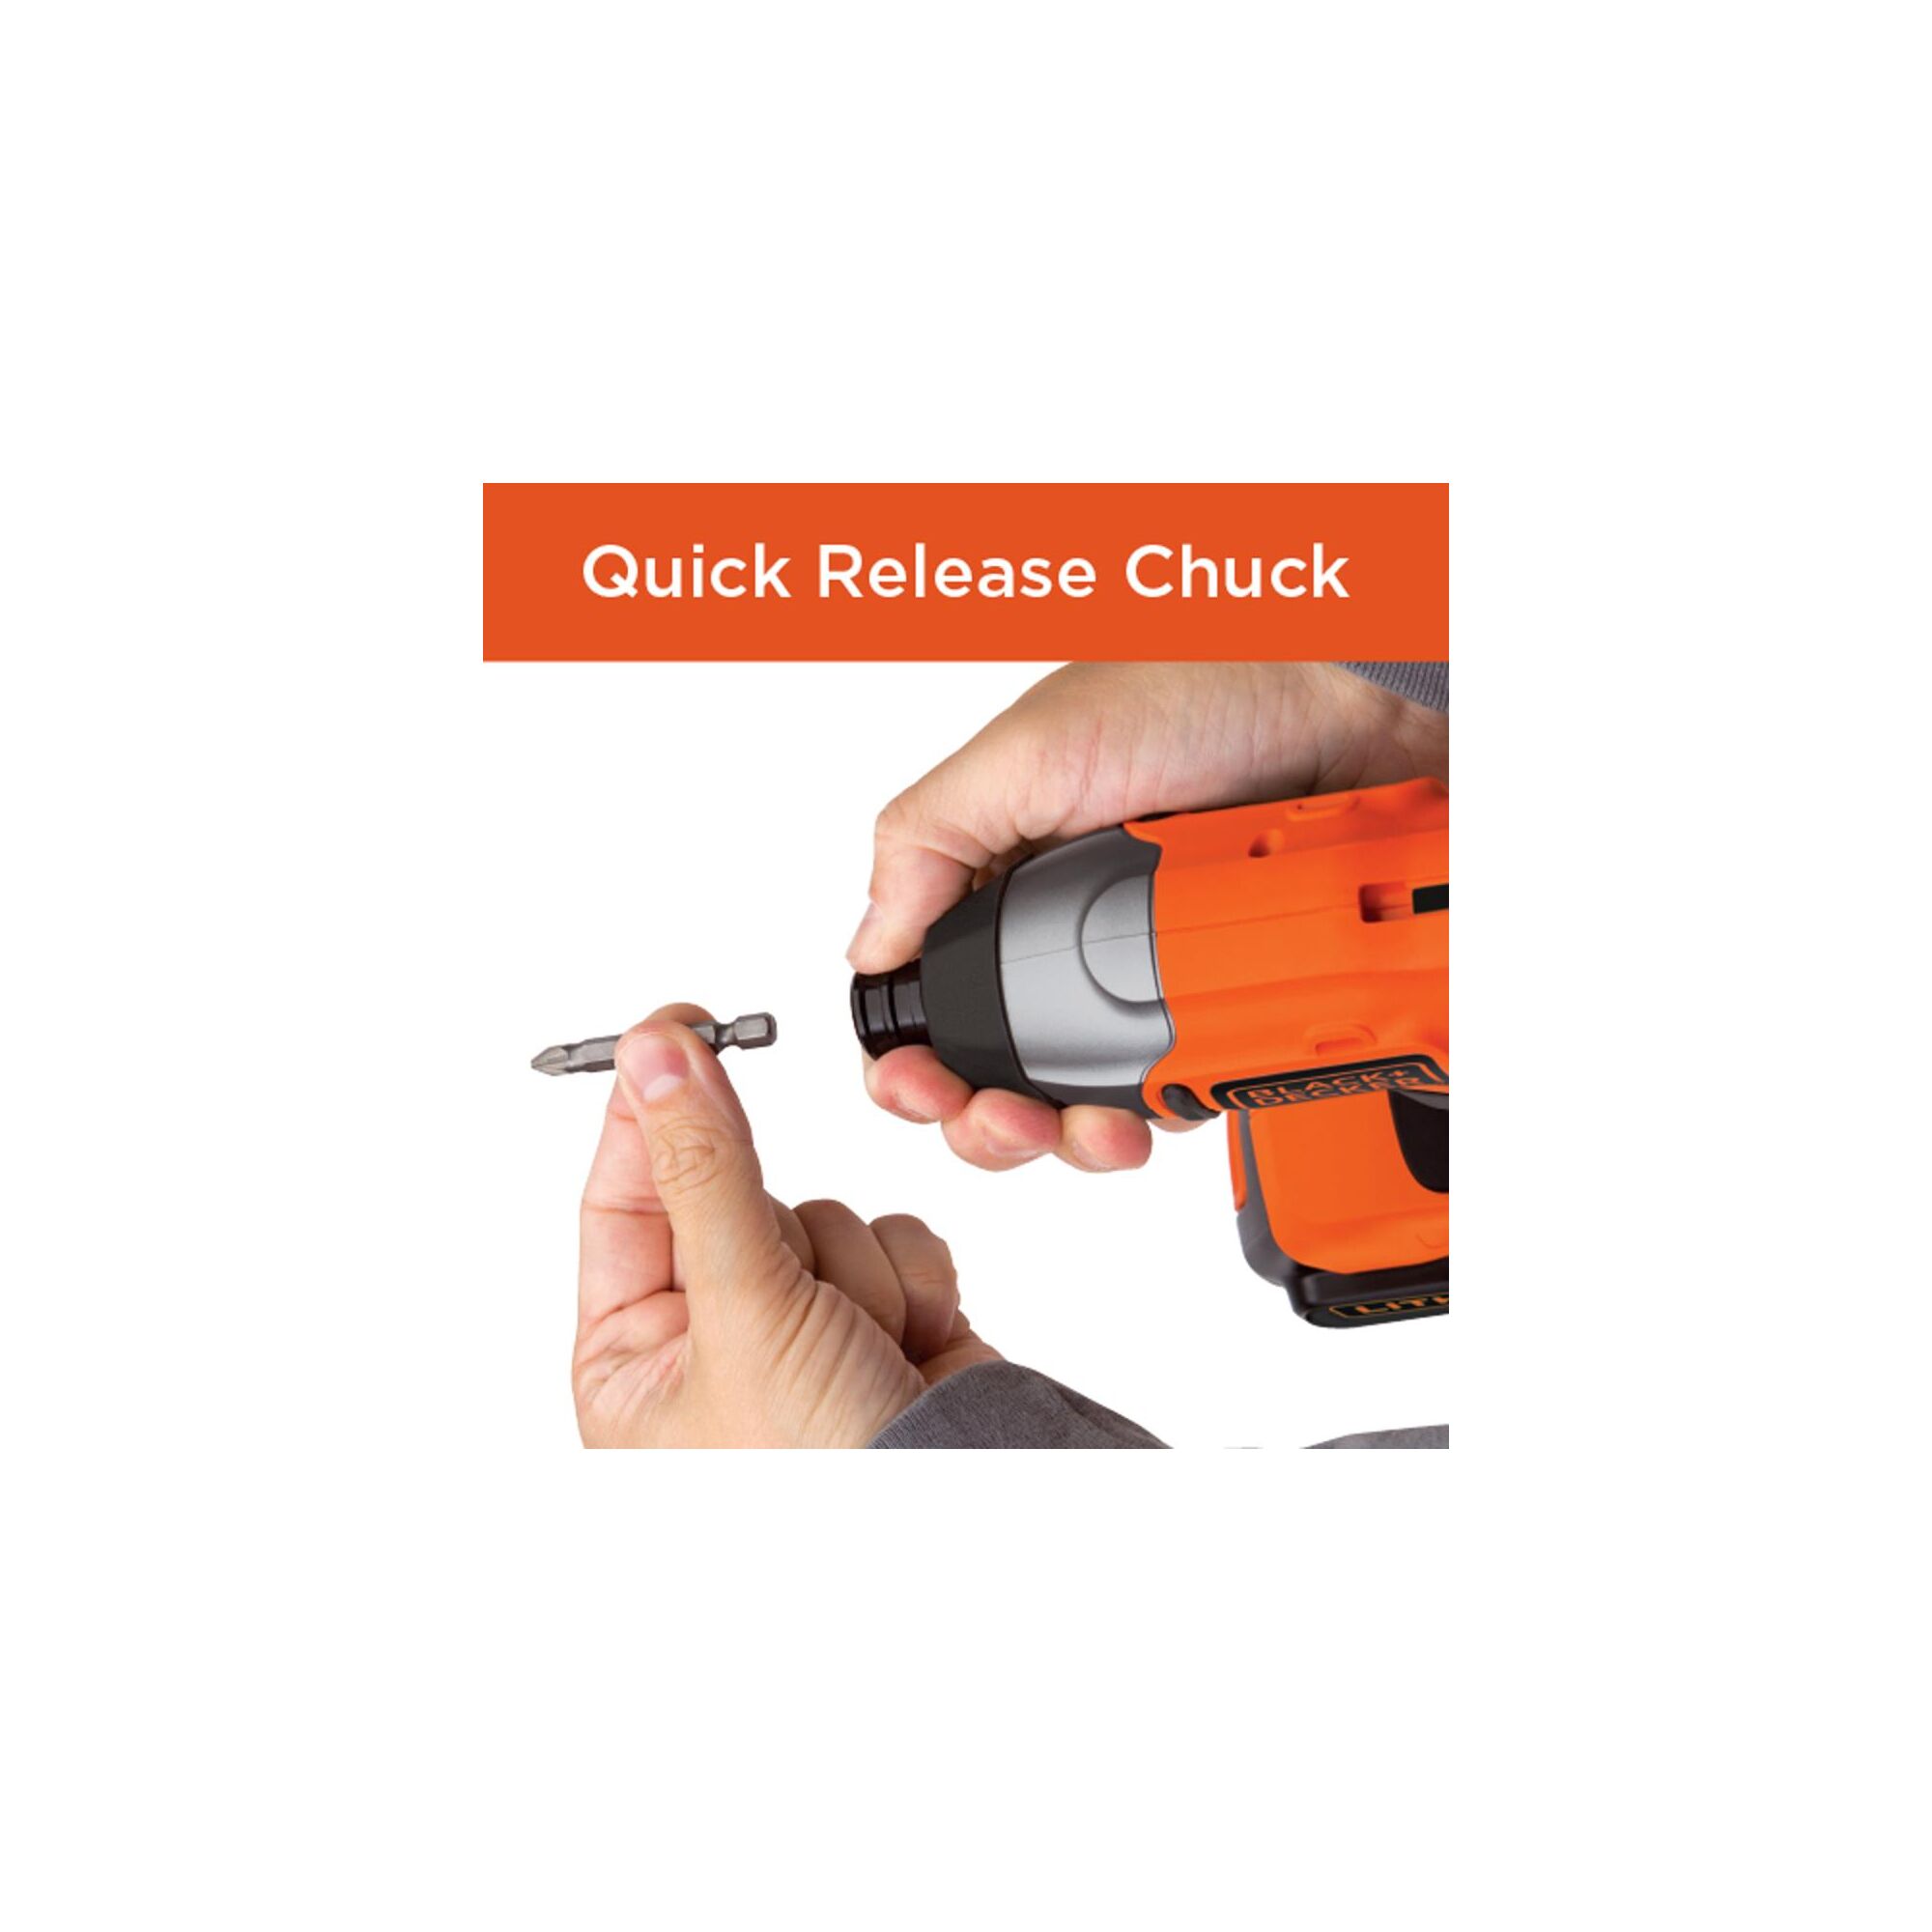 Removable drill tip feature of a lithium impact driver.